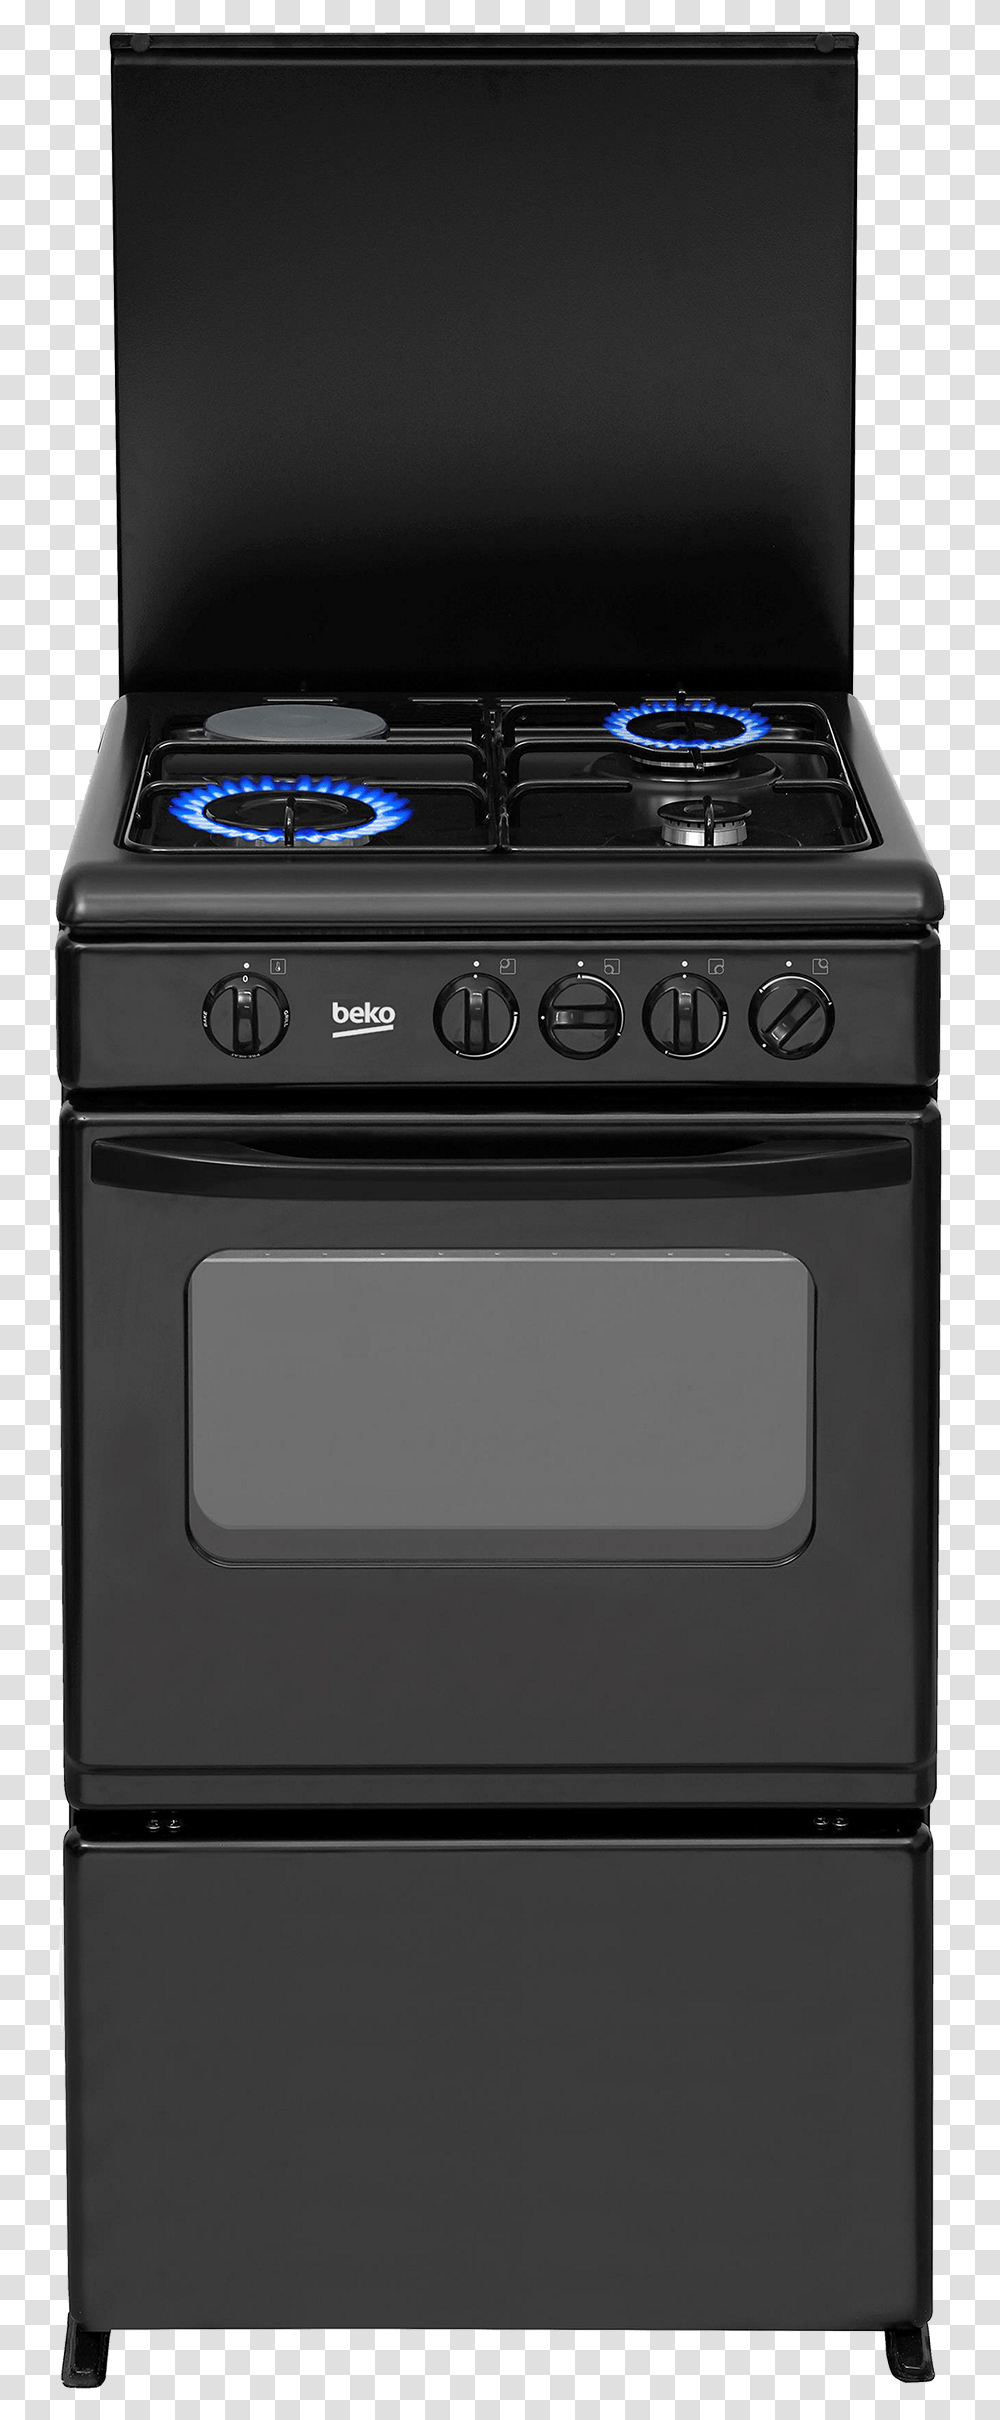 Defy, Stove, Oven, Appliance, Gas Stove Transparent Png